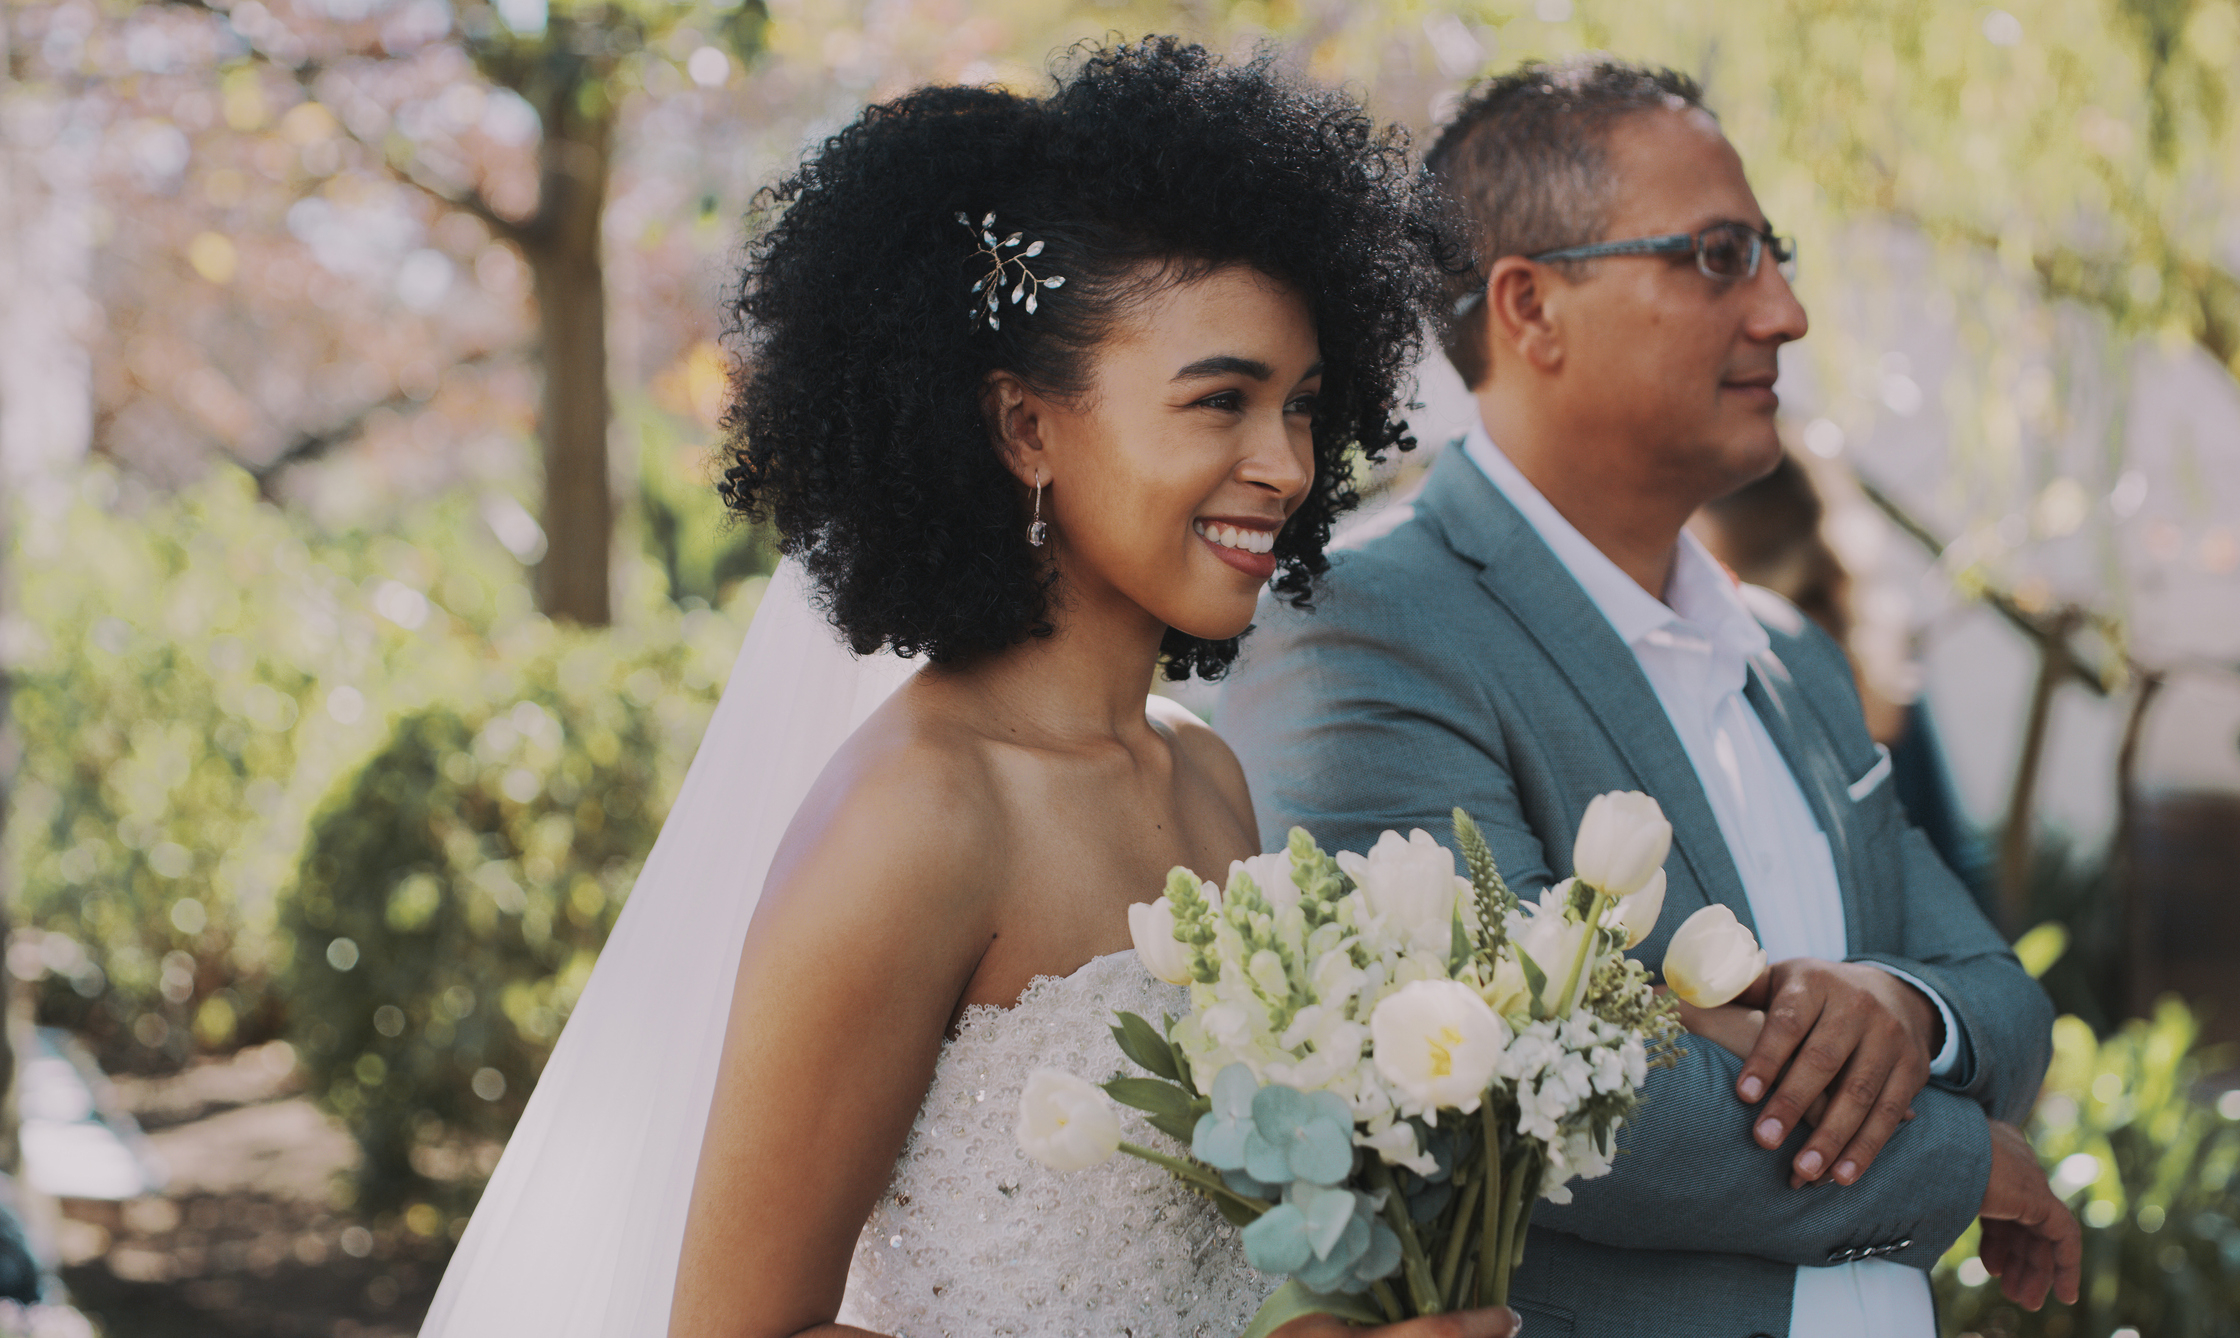 A bride with her father, about to walk down the aisle